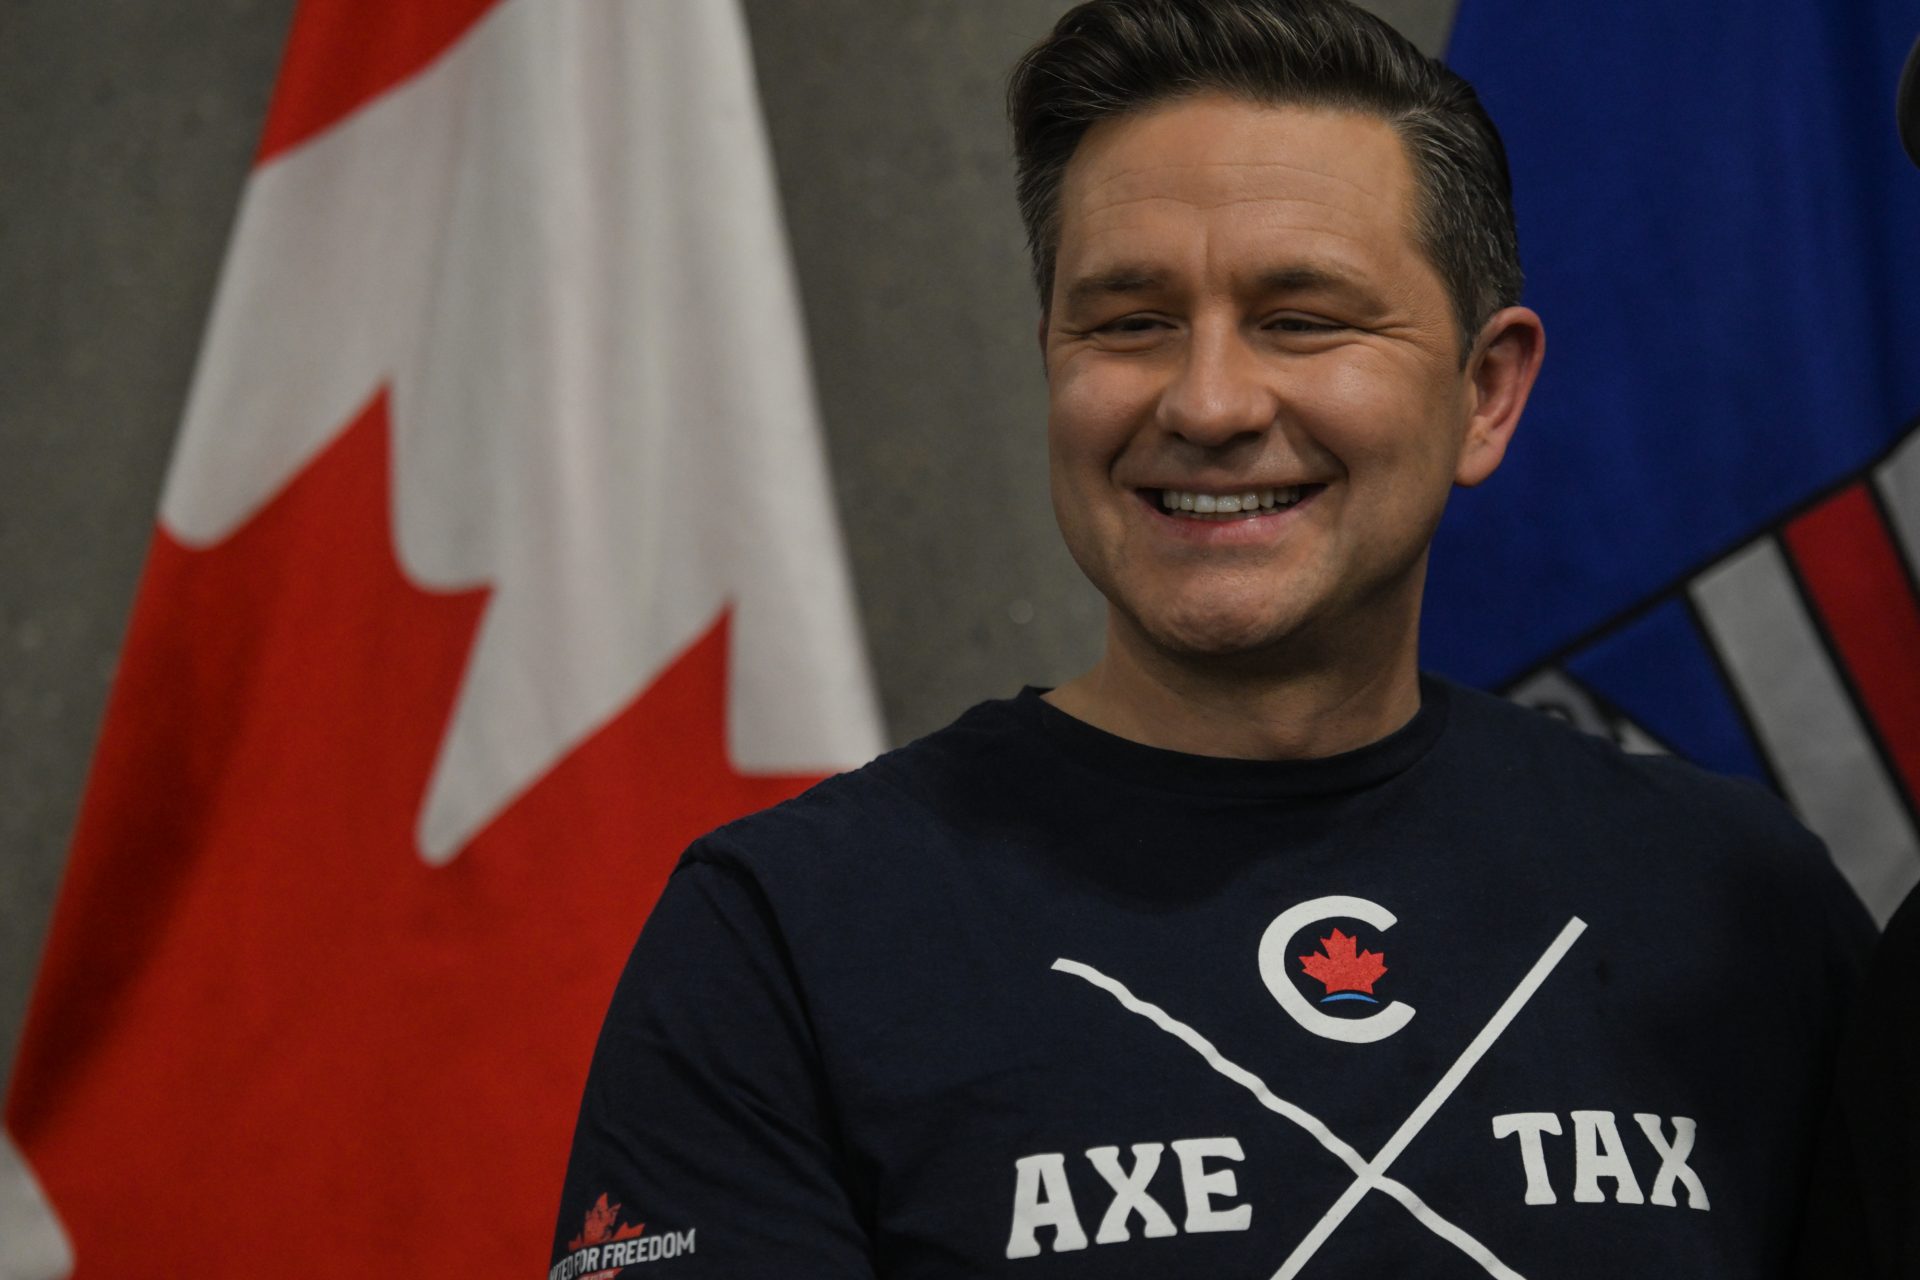 Pierre Poilievre is beating Trudeau 